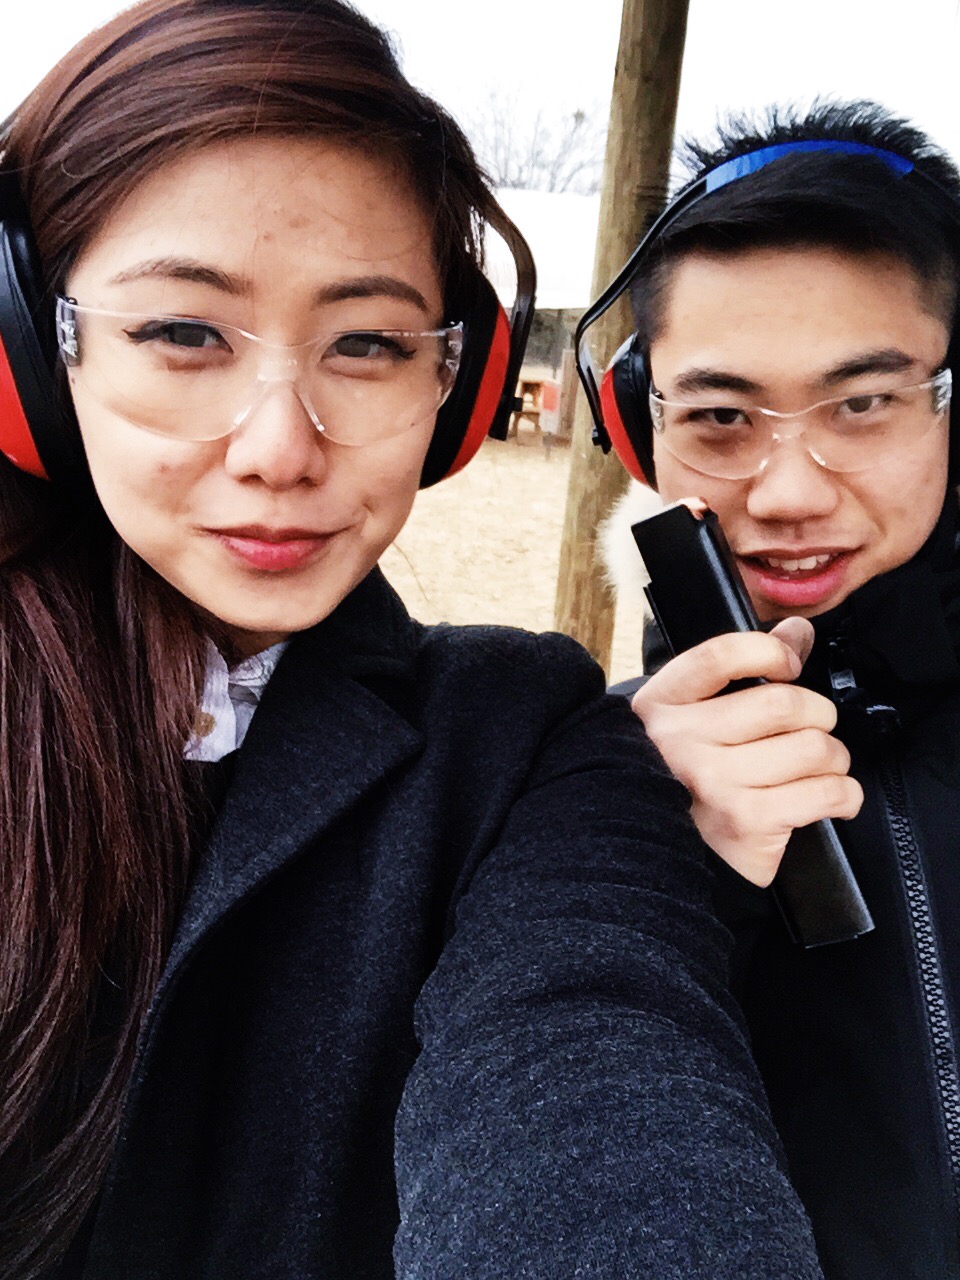   {those ear protectors functioned pretty well as earmuffs in the frigid cold.}  